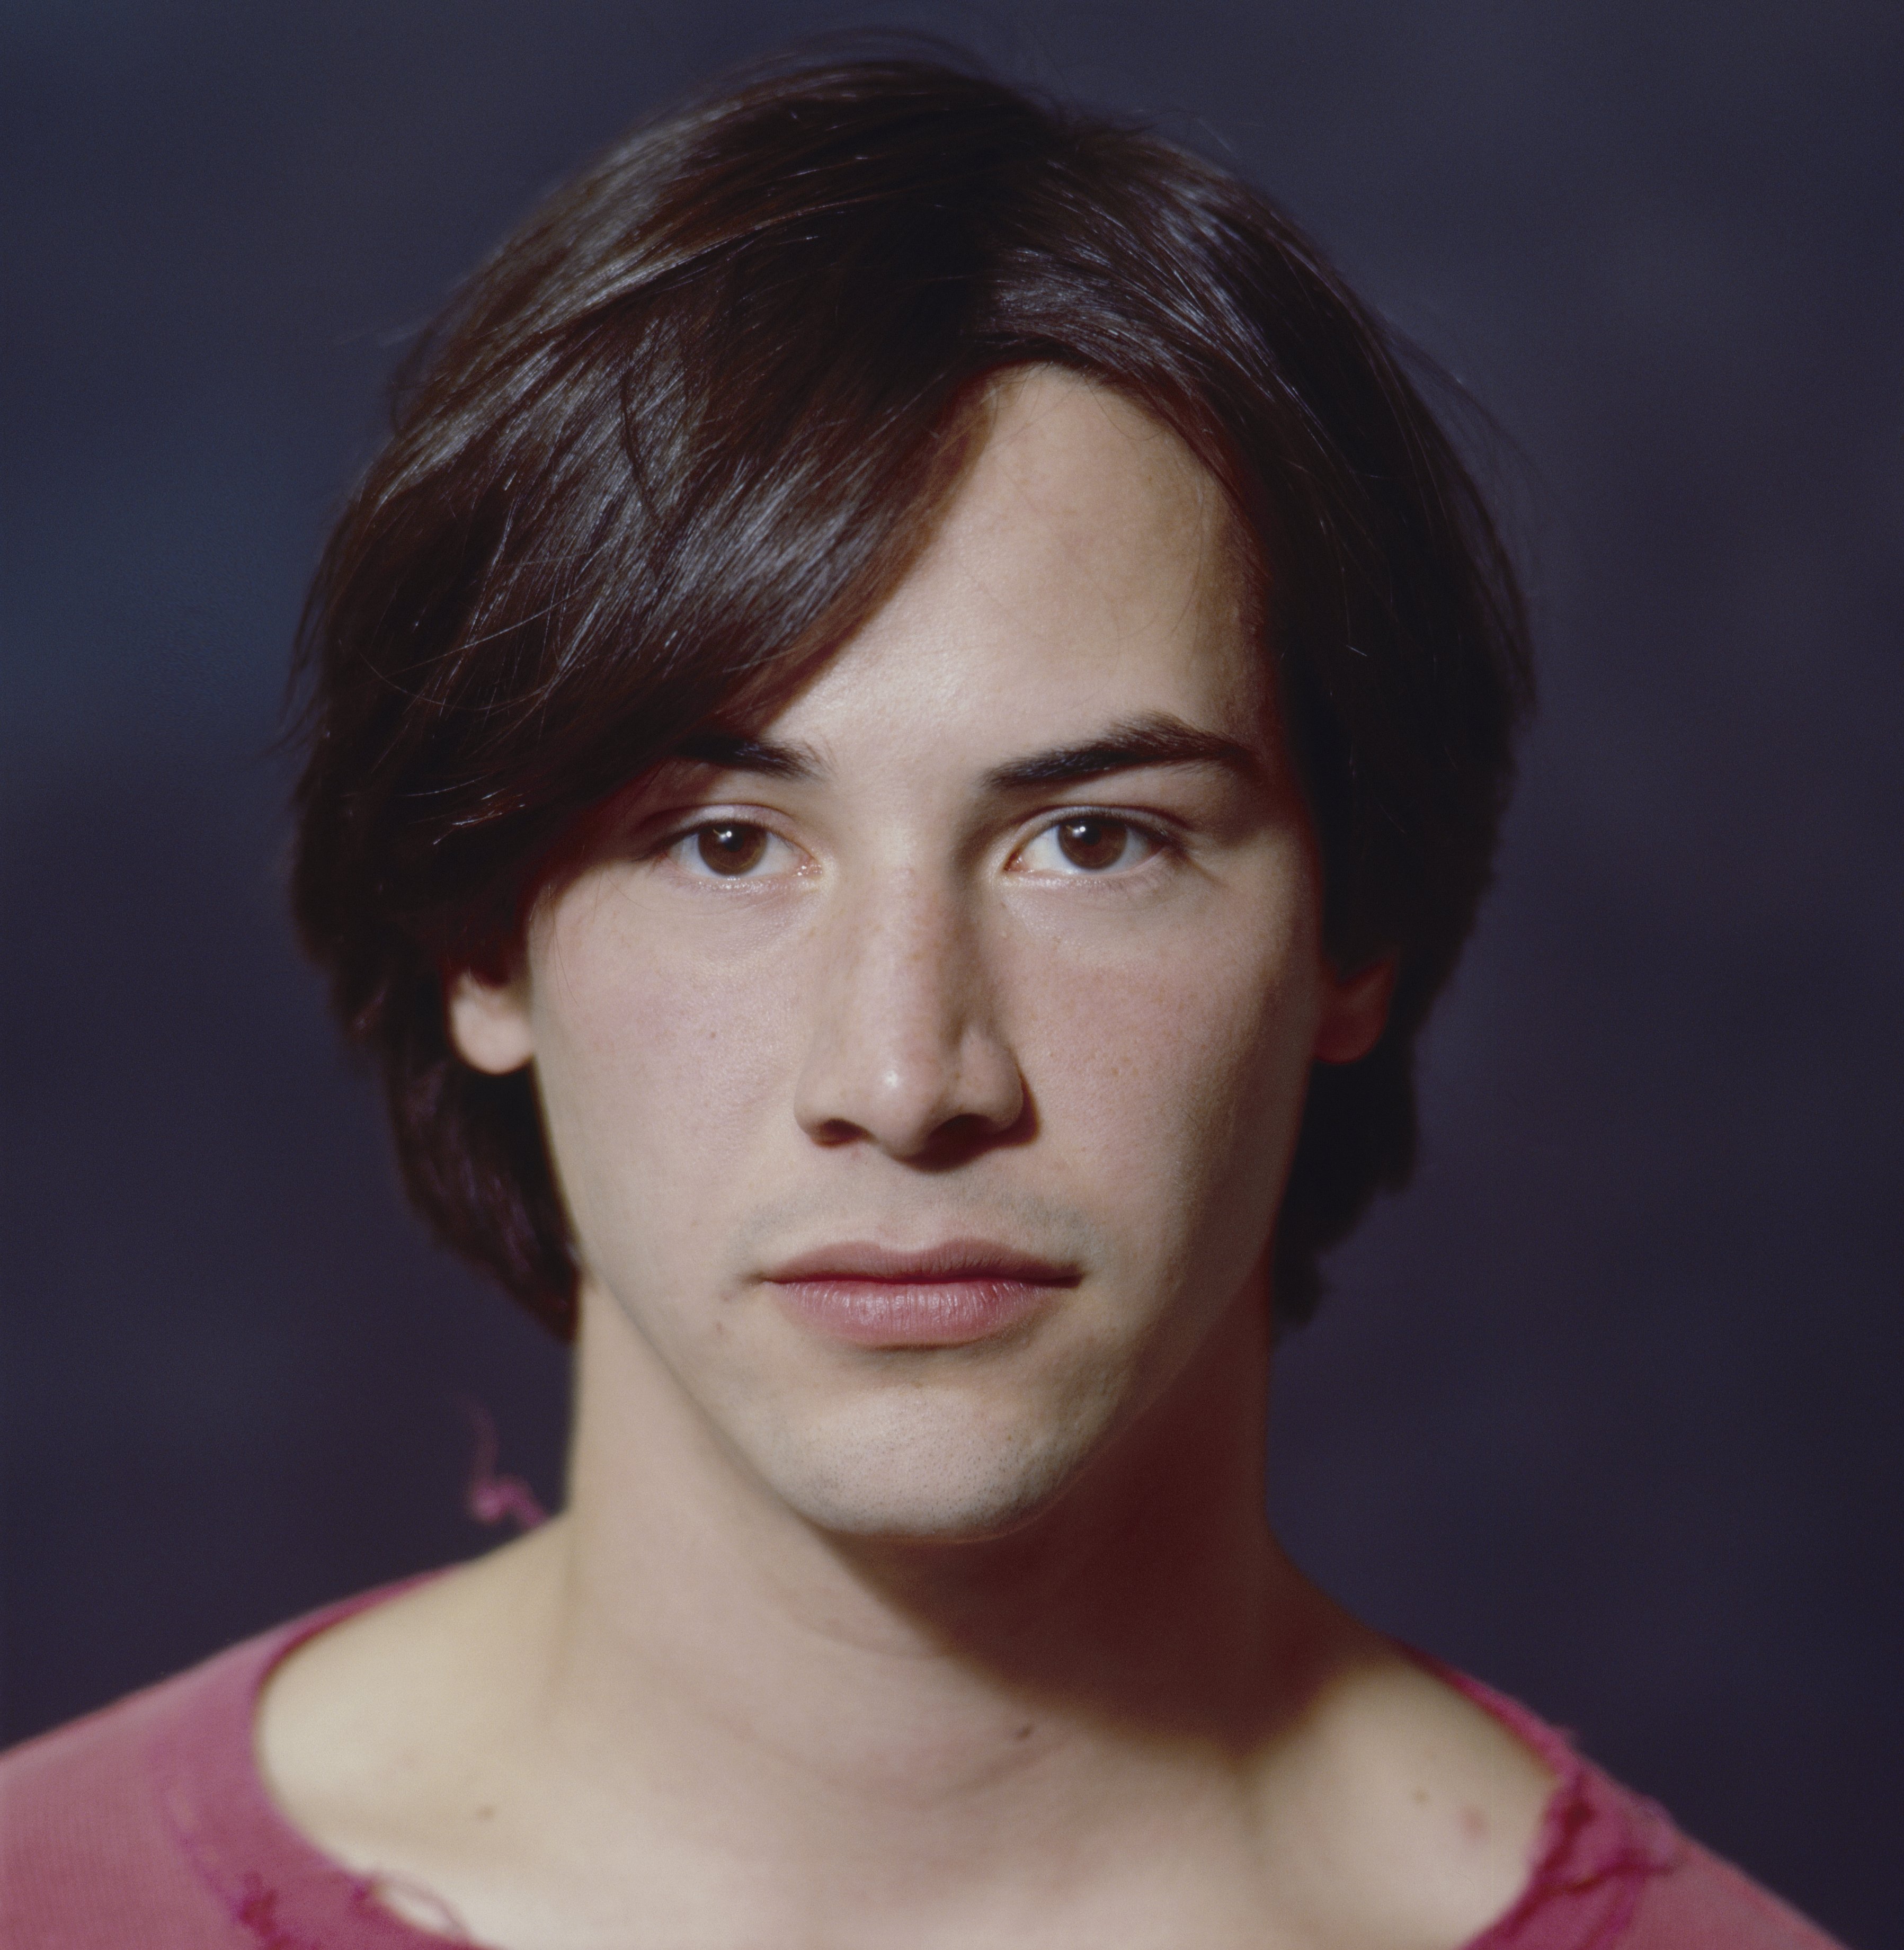 Keanu Reeves antes de filmar "Bill and Ted's Excellent Adventure" en 1986. | Foto: Getty Images